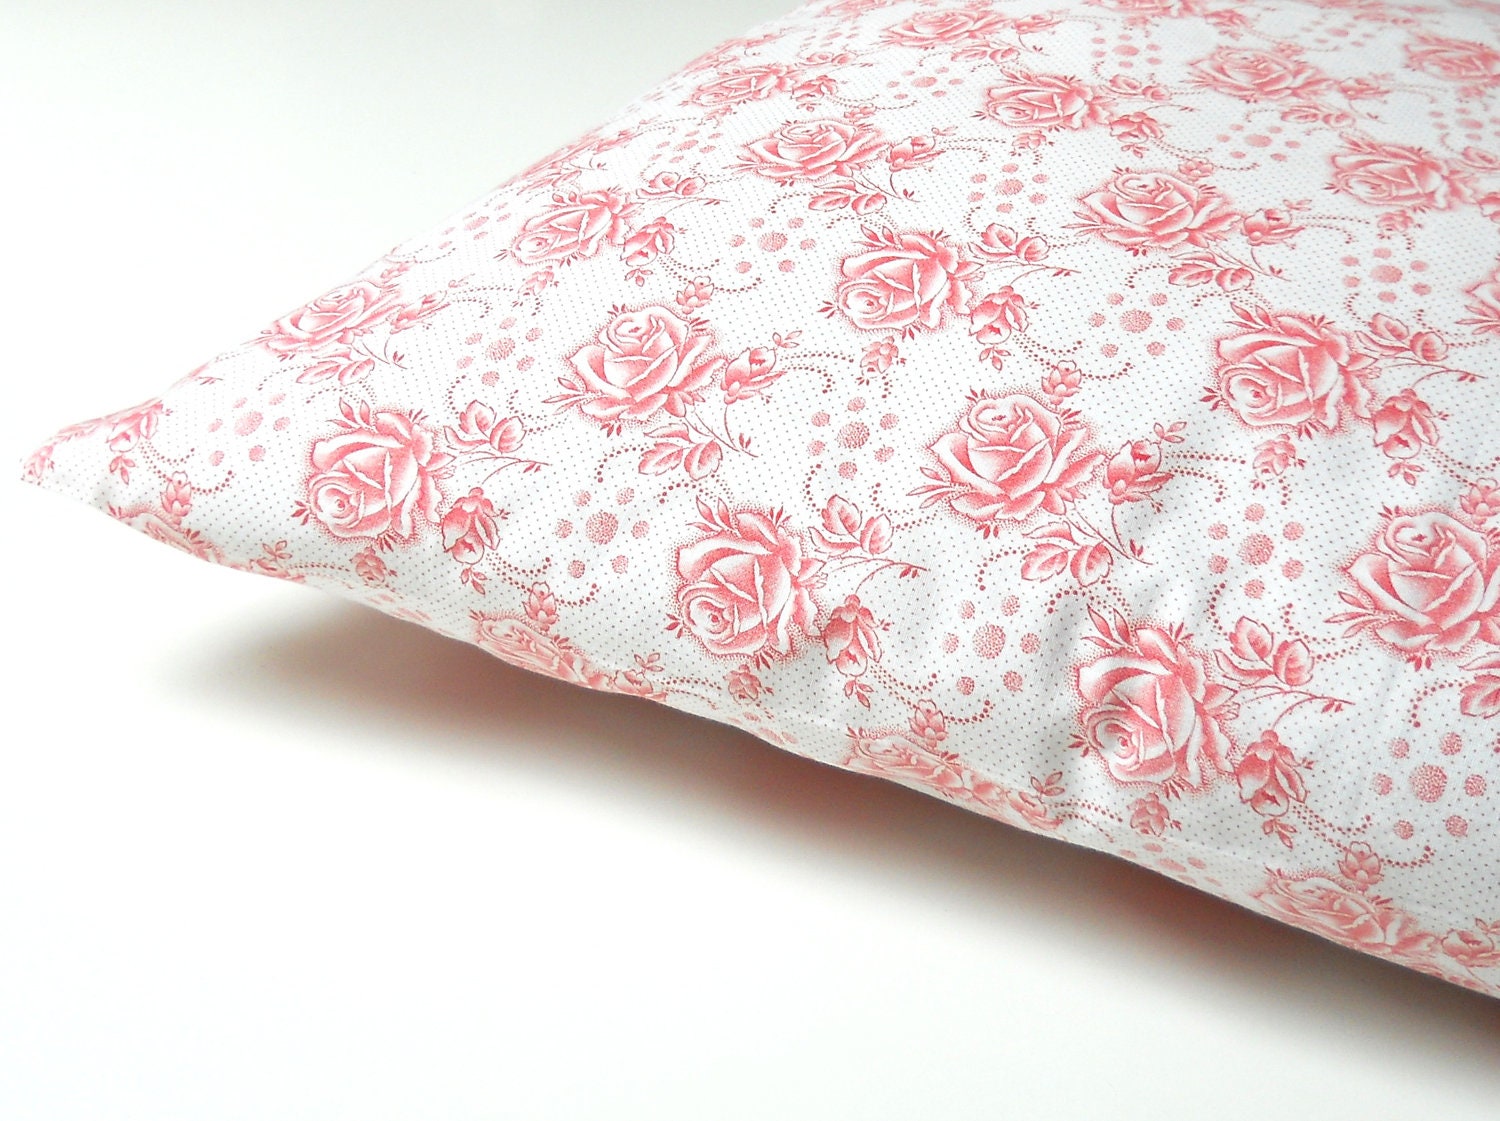 antique french pillow case, pillow sham, vintage pillow cover, vintage bedding, pink roses, shabby chic - minoucbrocante